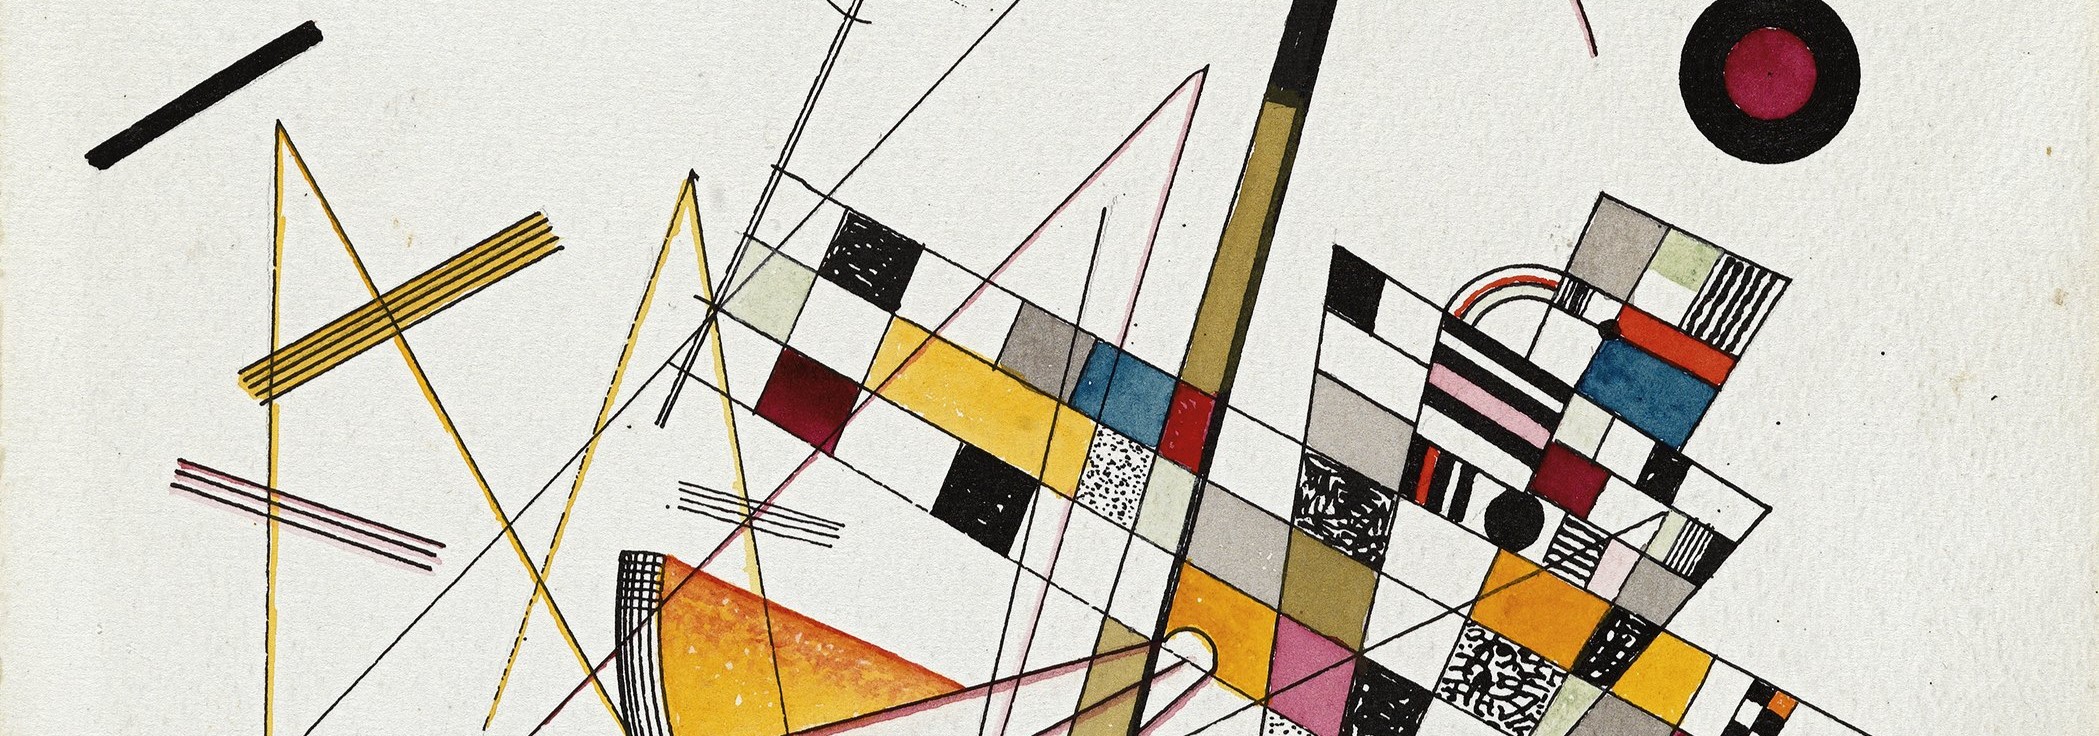 The site header, cropped from the abstract piece Delicate Tension no. 85 by Wassily Kandinsky